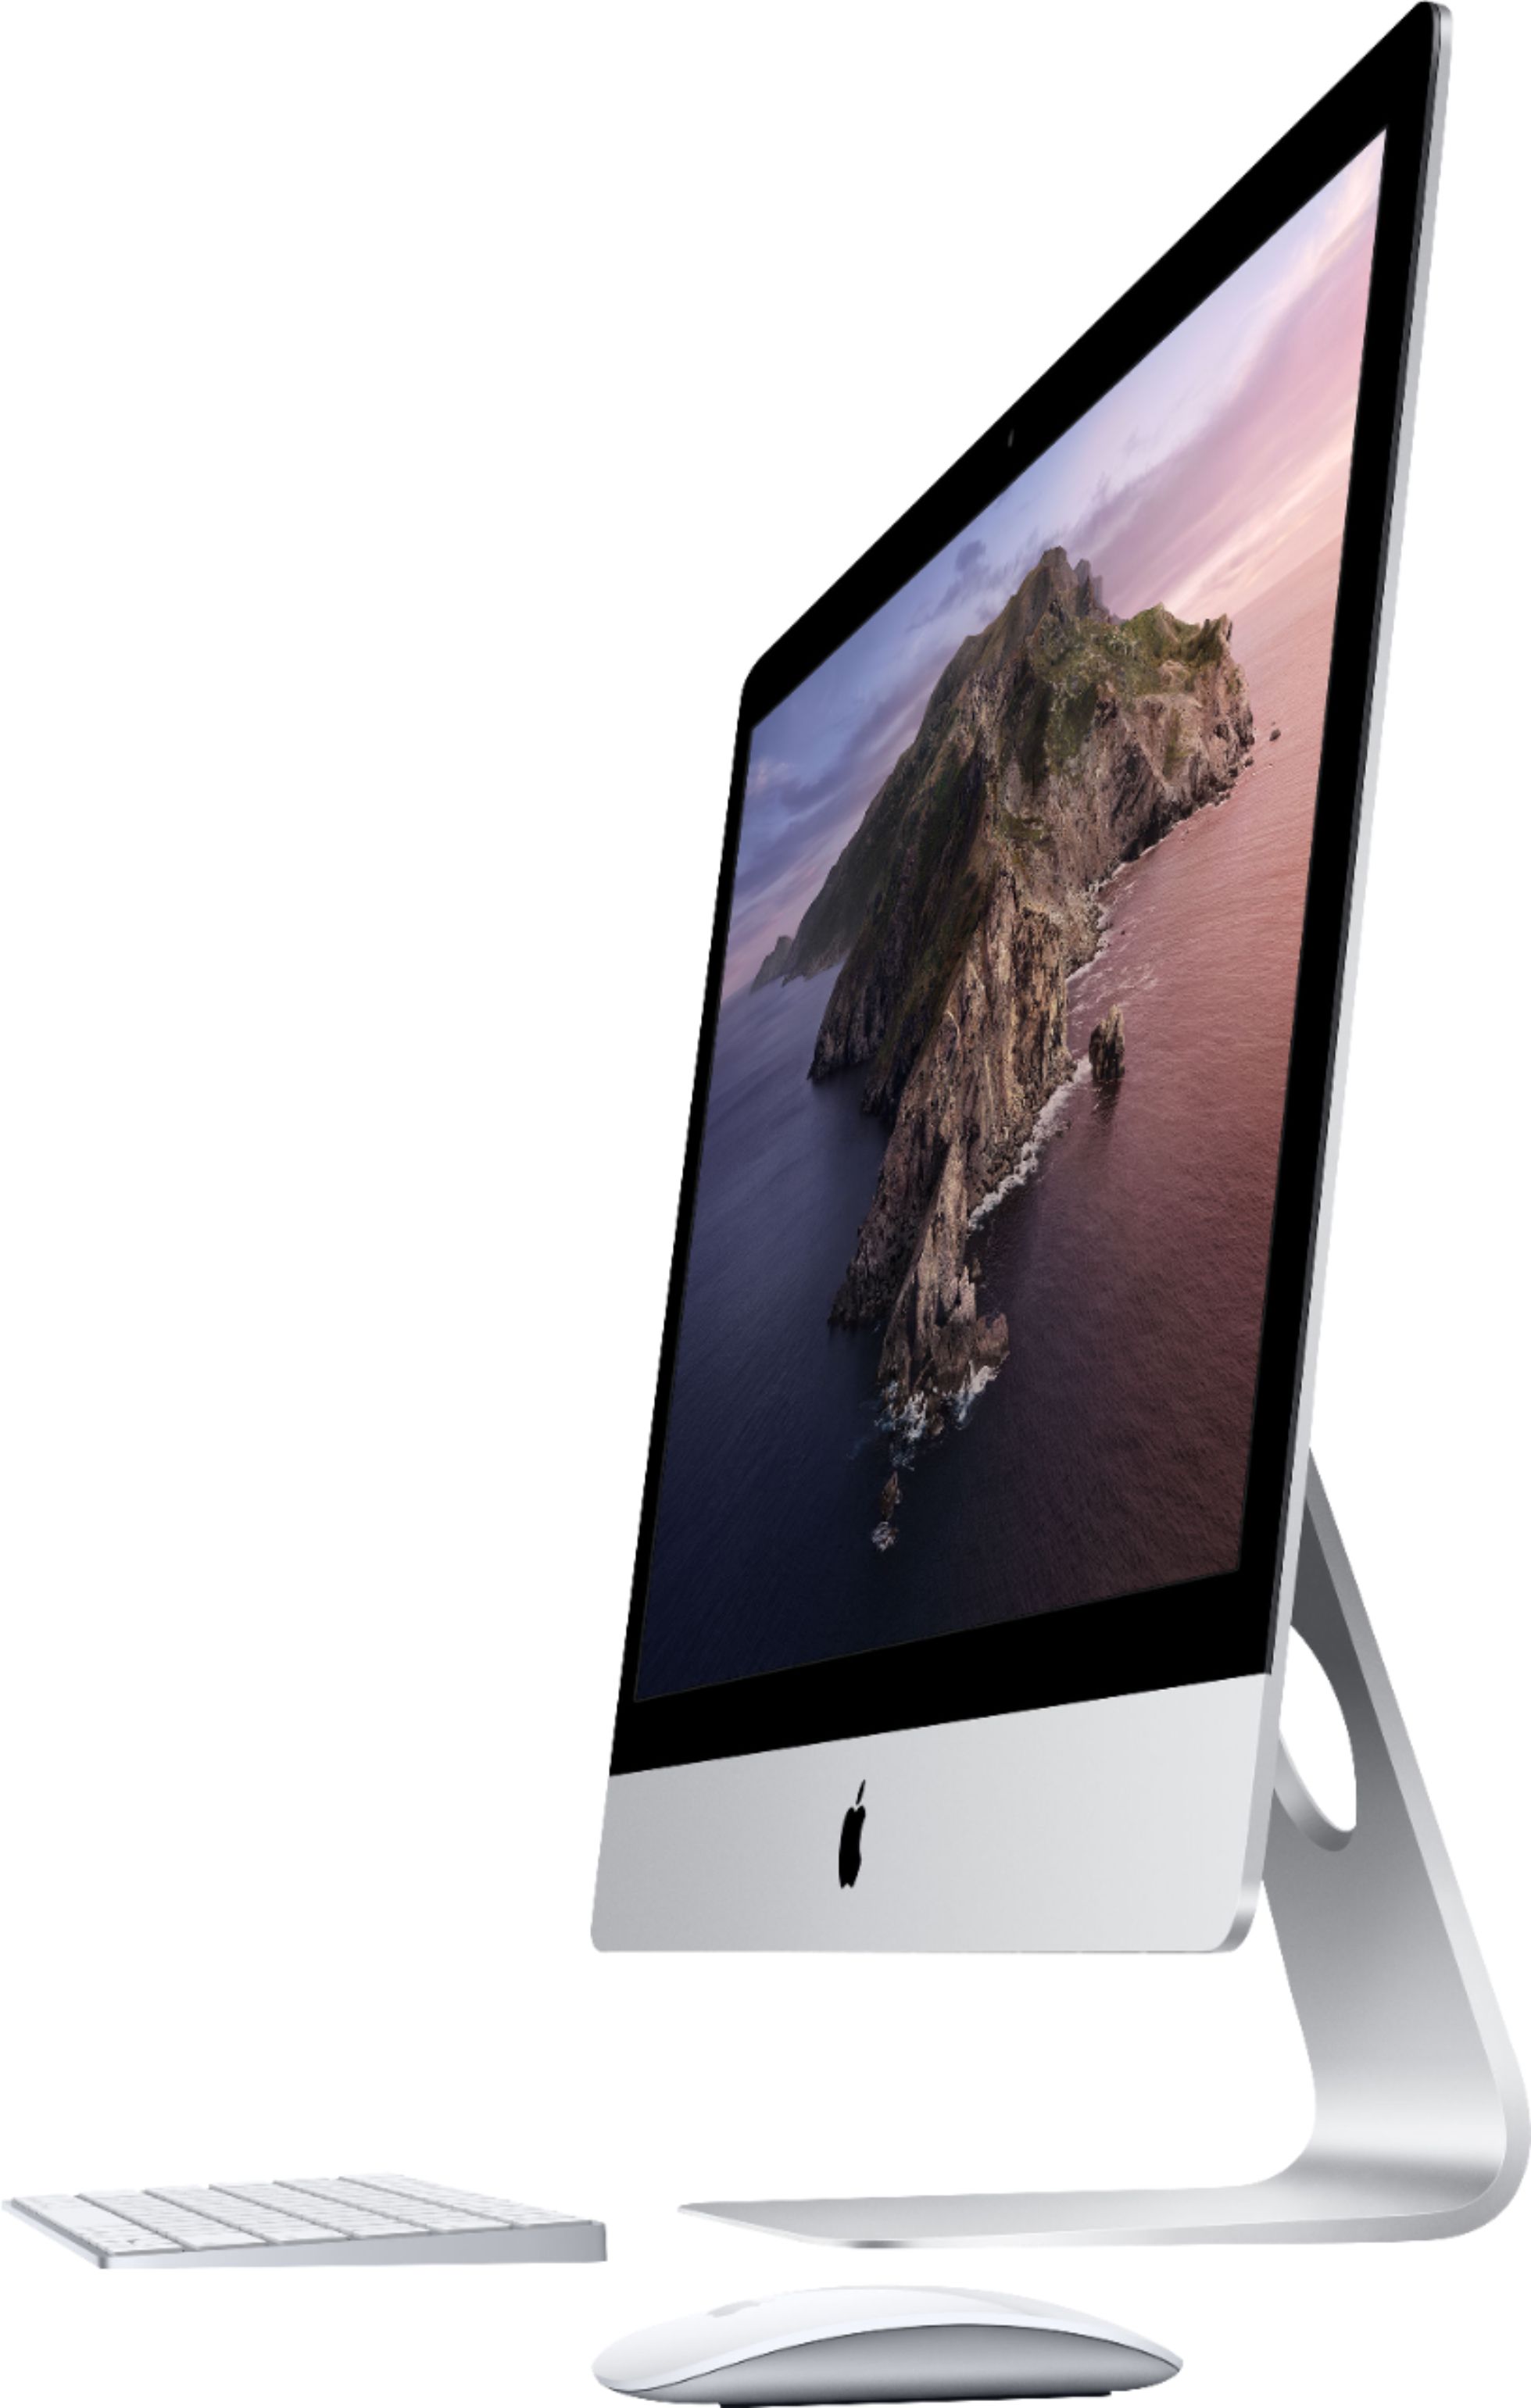 Left View: Apple - 27" iMac® with Retina 5k display (Latest Model) - Intel Core i5 (3.1GHz) - 8GB Memory - 1TB Fusion Drive - Silver